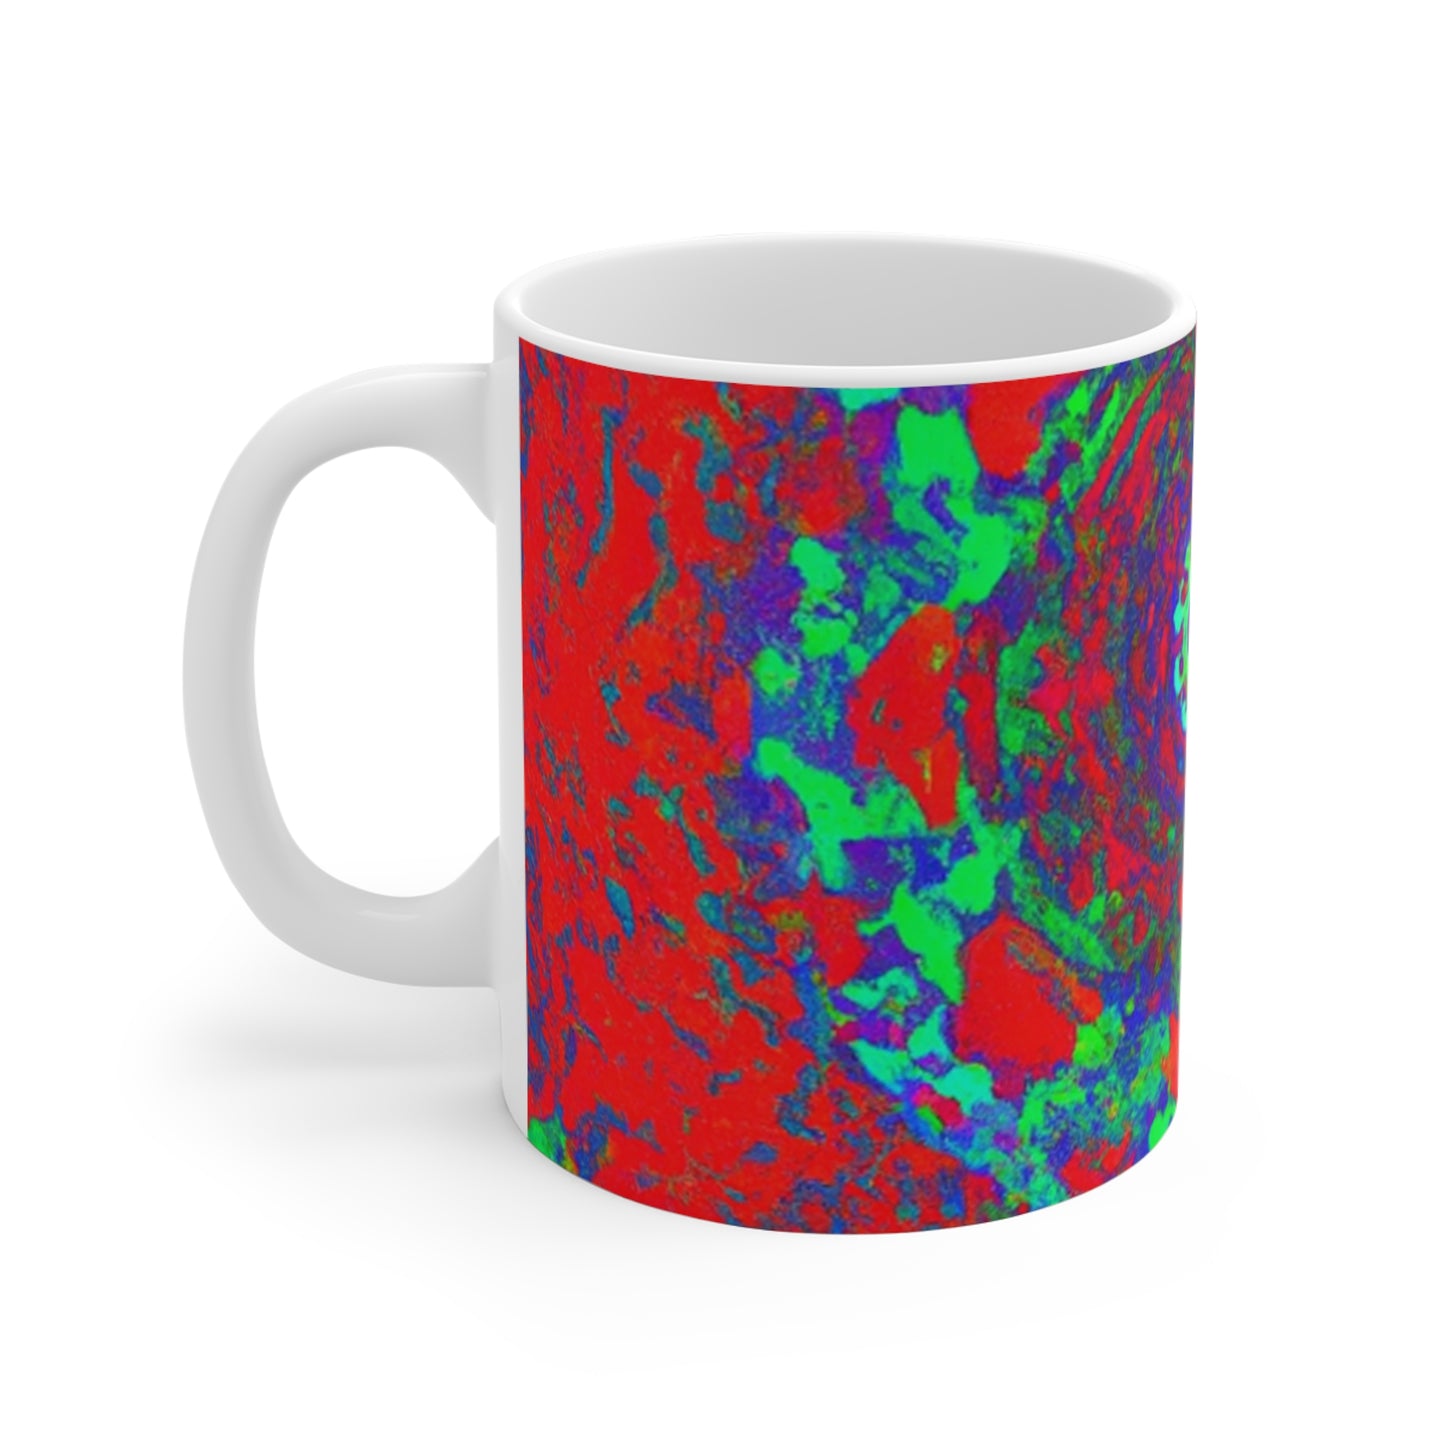 Robinson's Roasters - Psychedelic Coffee Cup Mug 11 Ounce